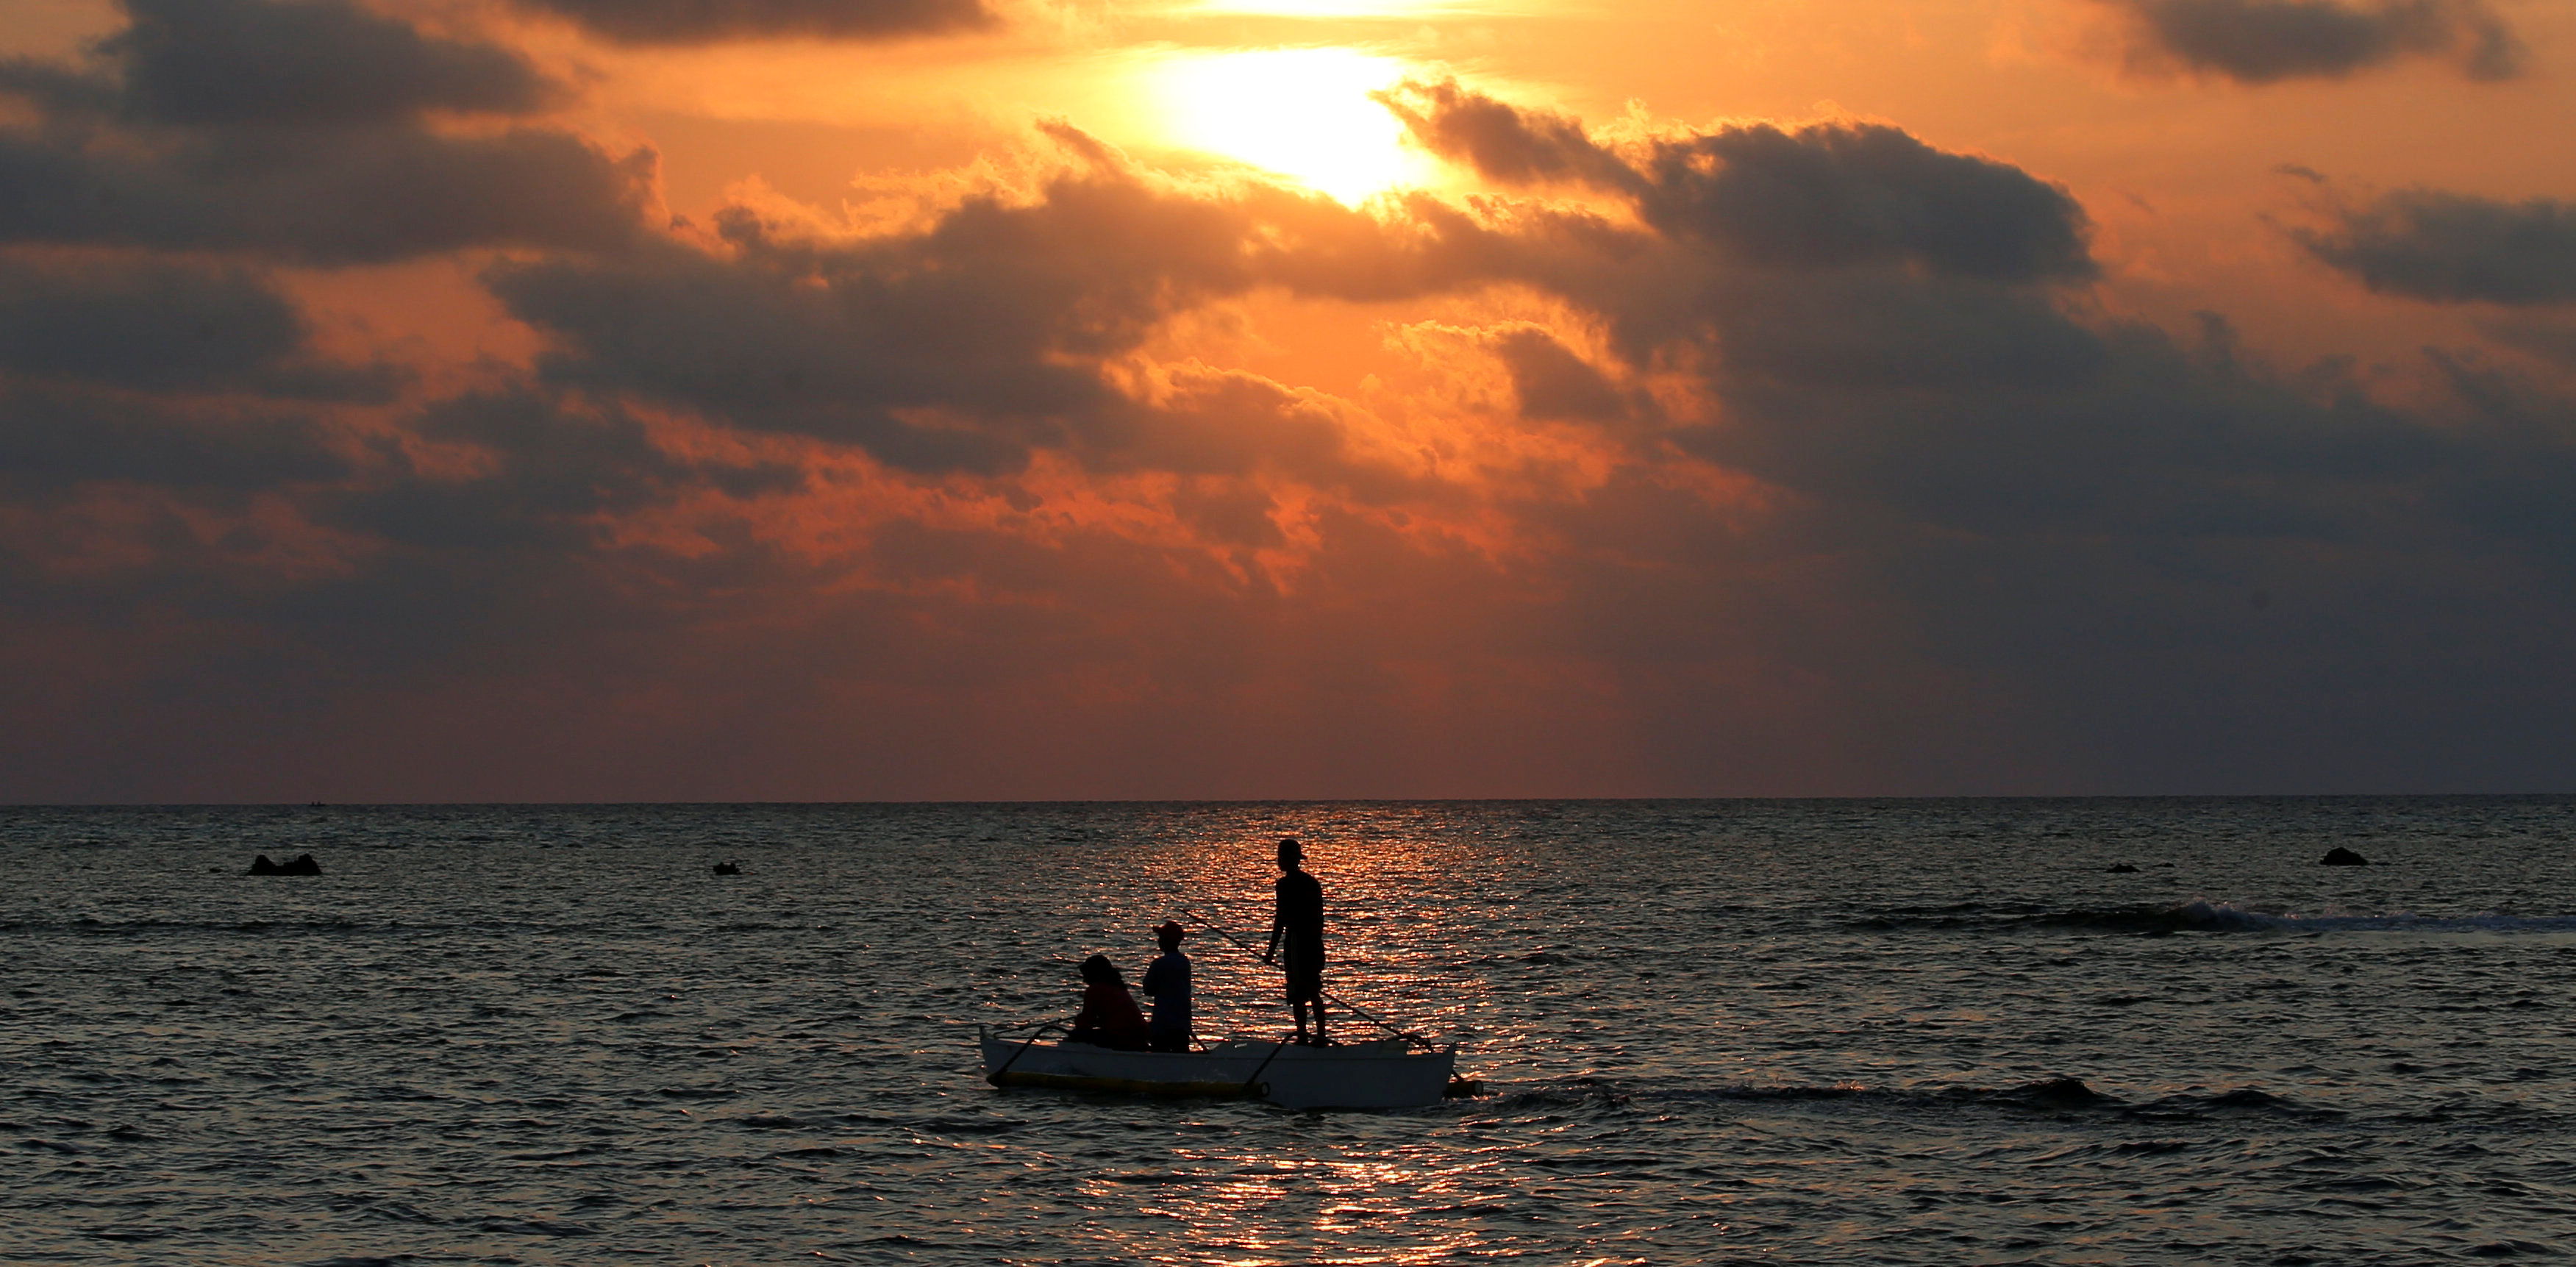 Philippine fishermen steer a dinghy during sunset in the disputed Scarborough Shoal. Photo: Reuters/Erik De Castro